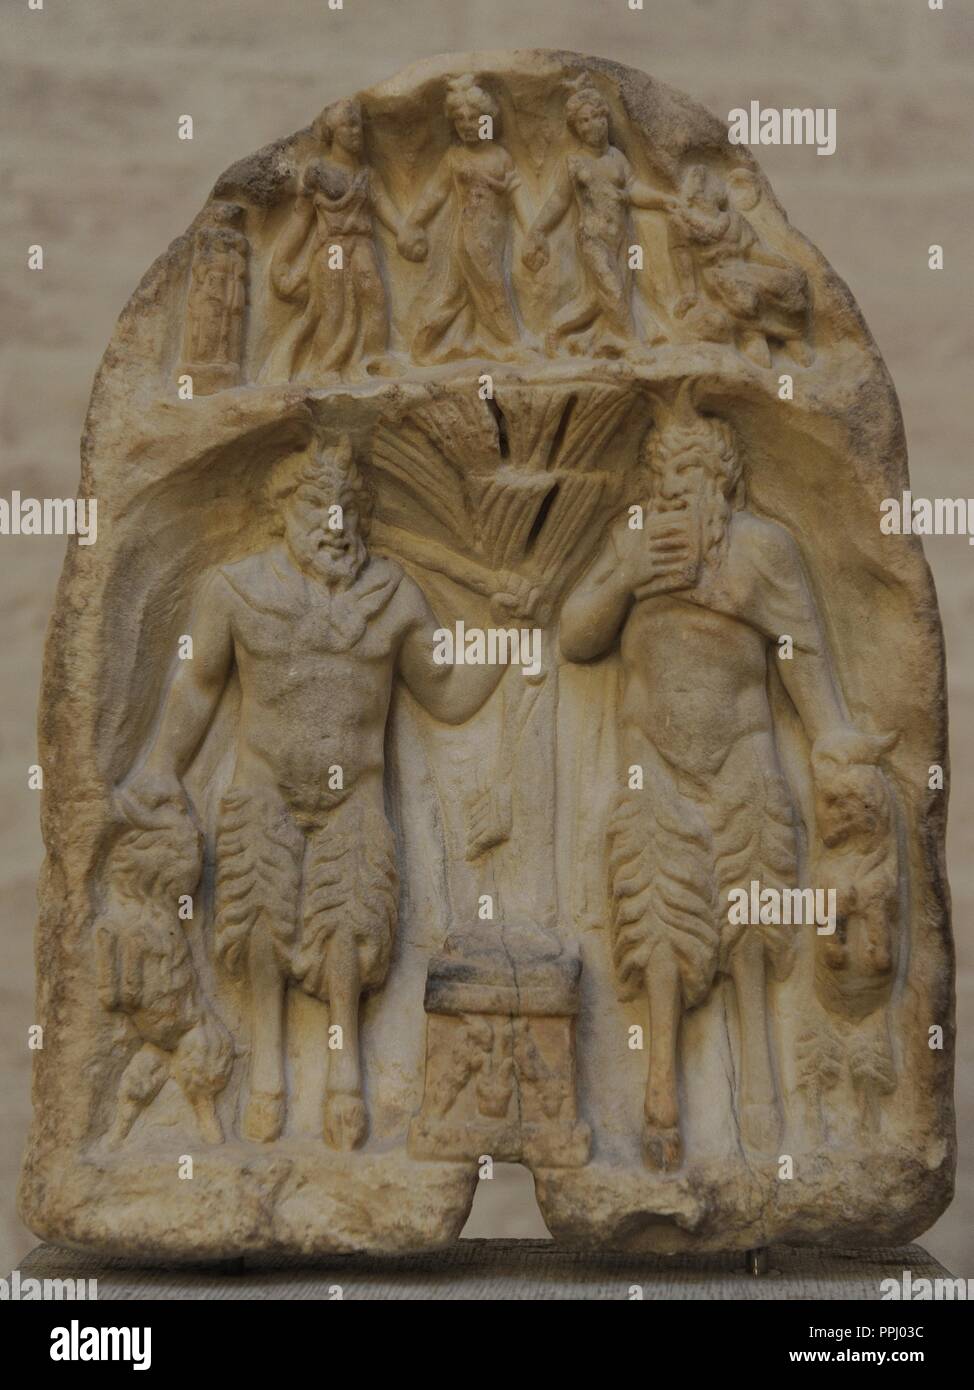 Votive relief for the shepherd god. About 160 AD. Two figures of Pan in a grotto with an altar and a tree between them, above three nymphs, Hermes and a cult pillar of Hecate. Glyptothek. Munich. Germany. Europe.. Stock Photo